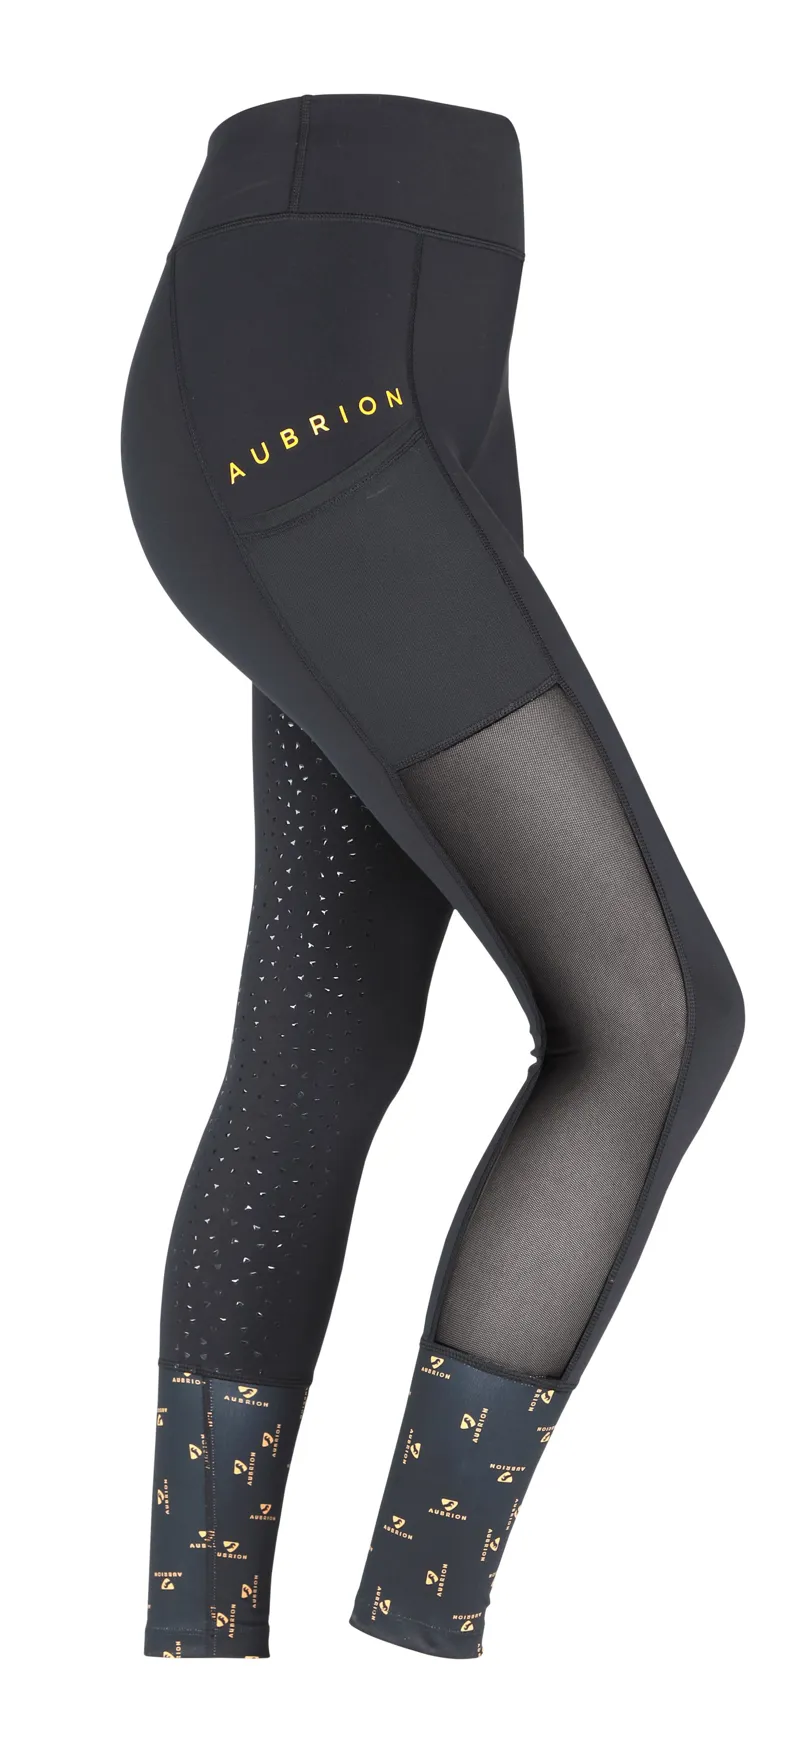 Bridleway Childs Paige Mesh Riding Tights